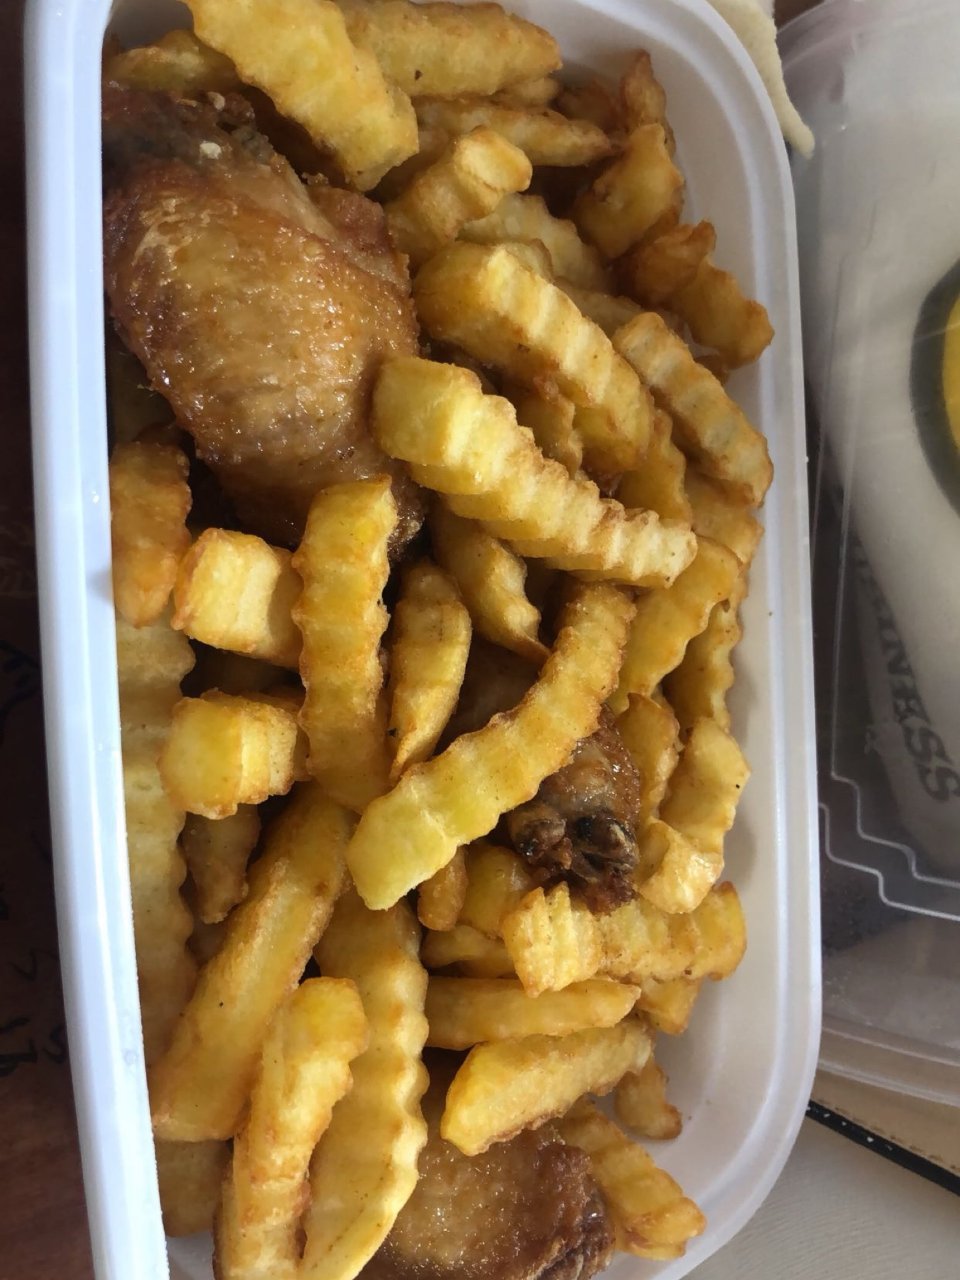 Chicken and fries 